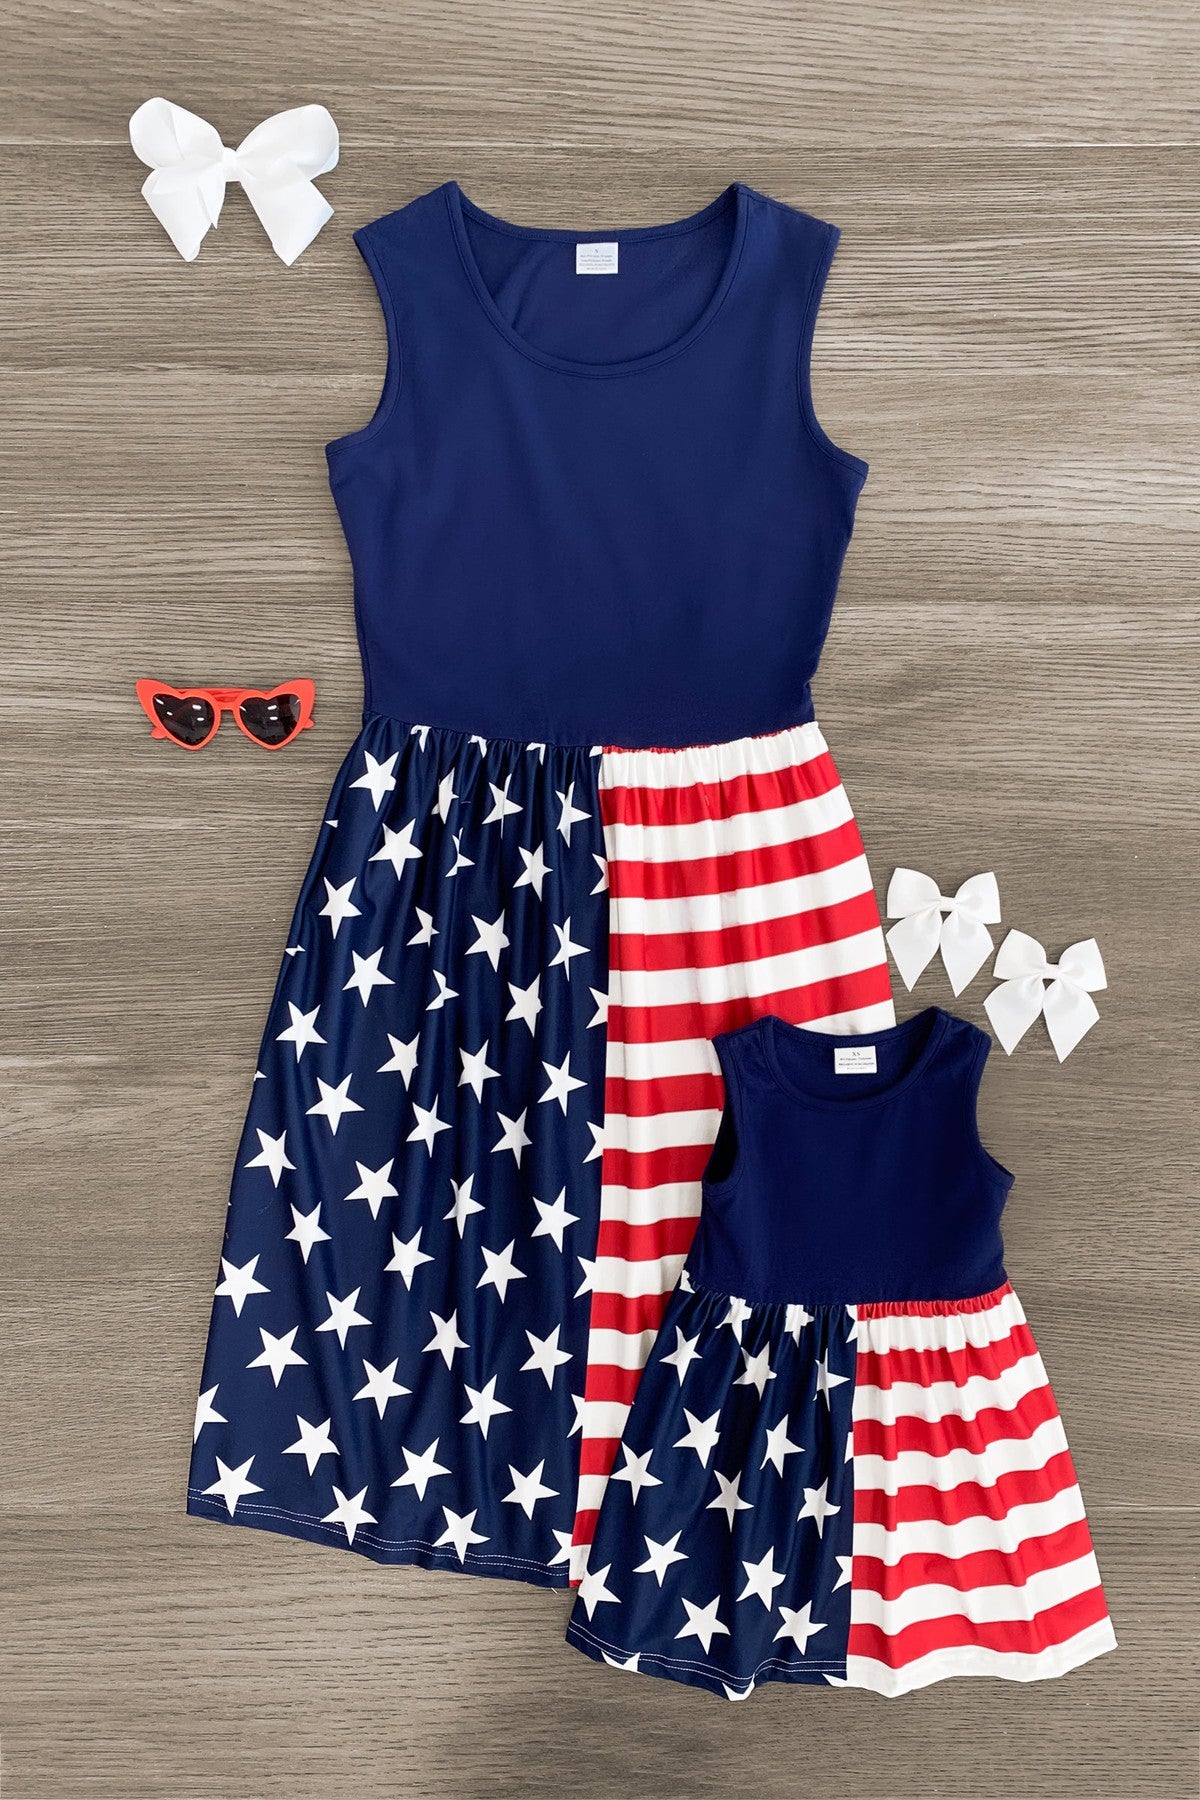 Mom & Me - American Flag Dress - Sparkle in Pink